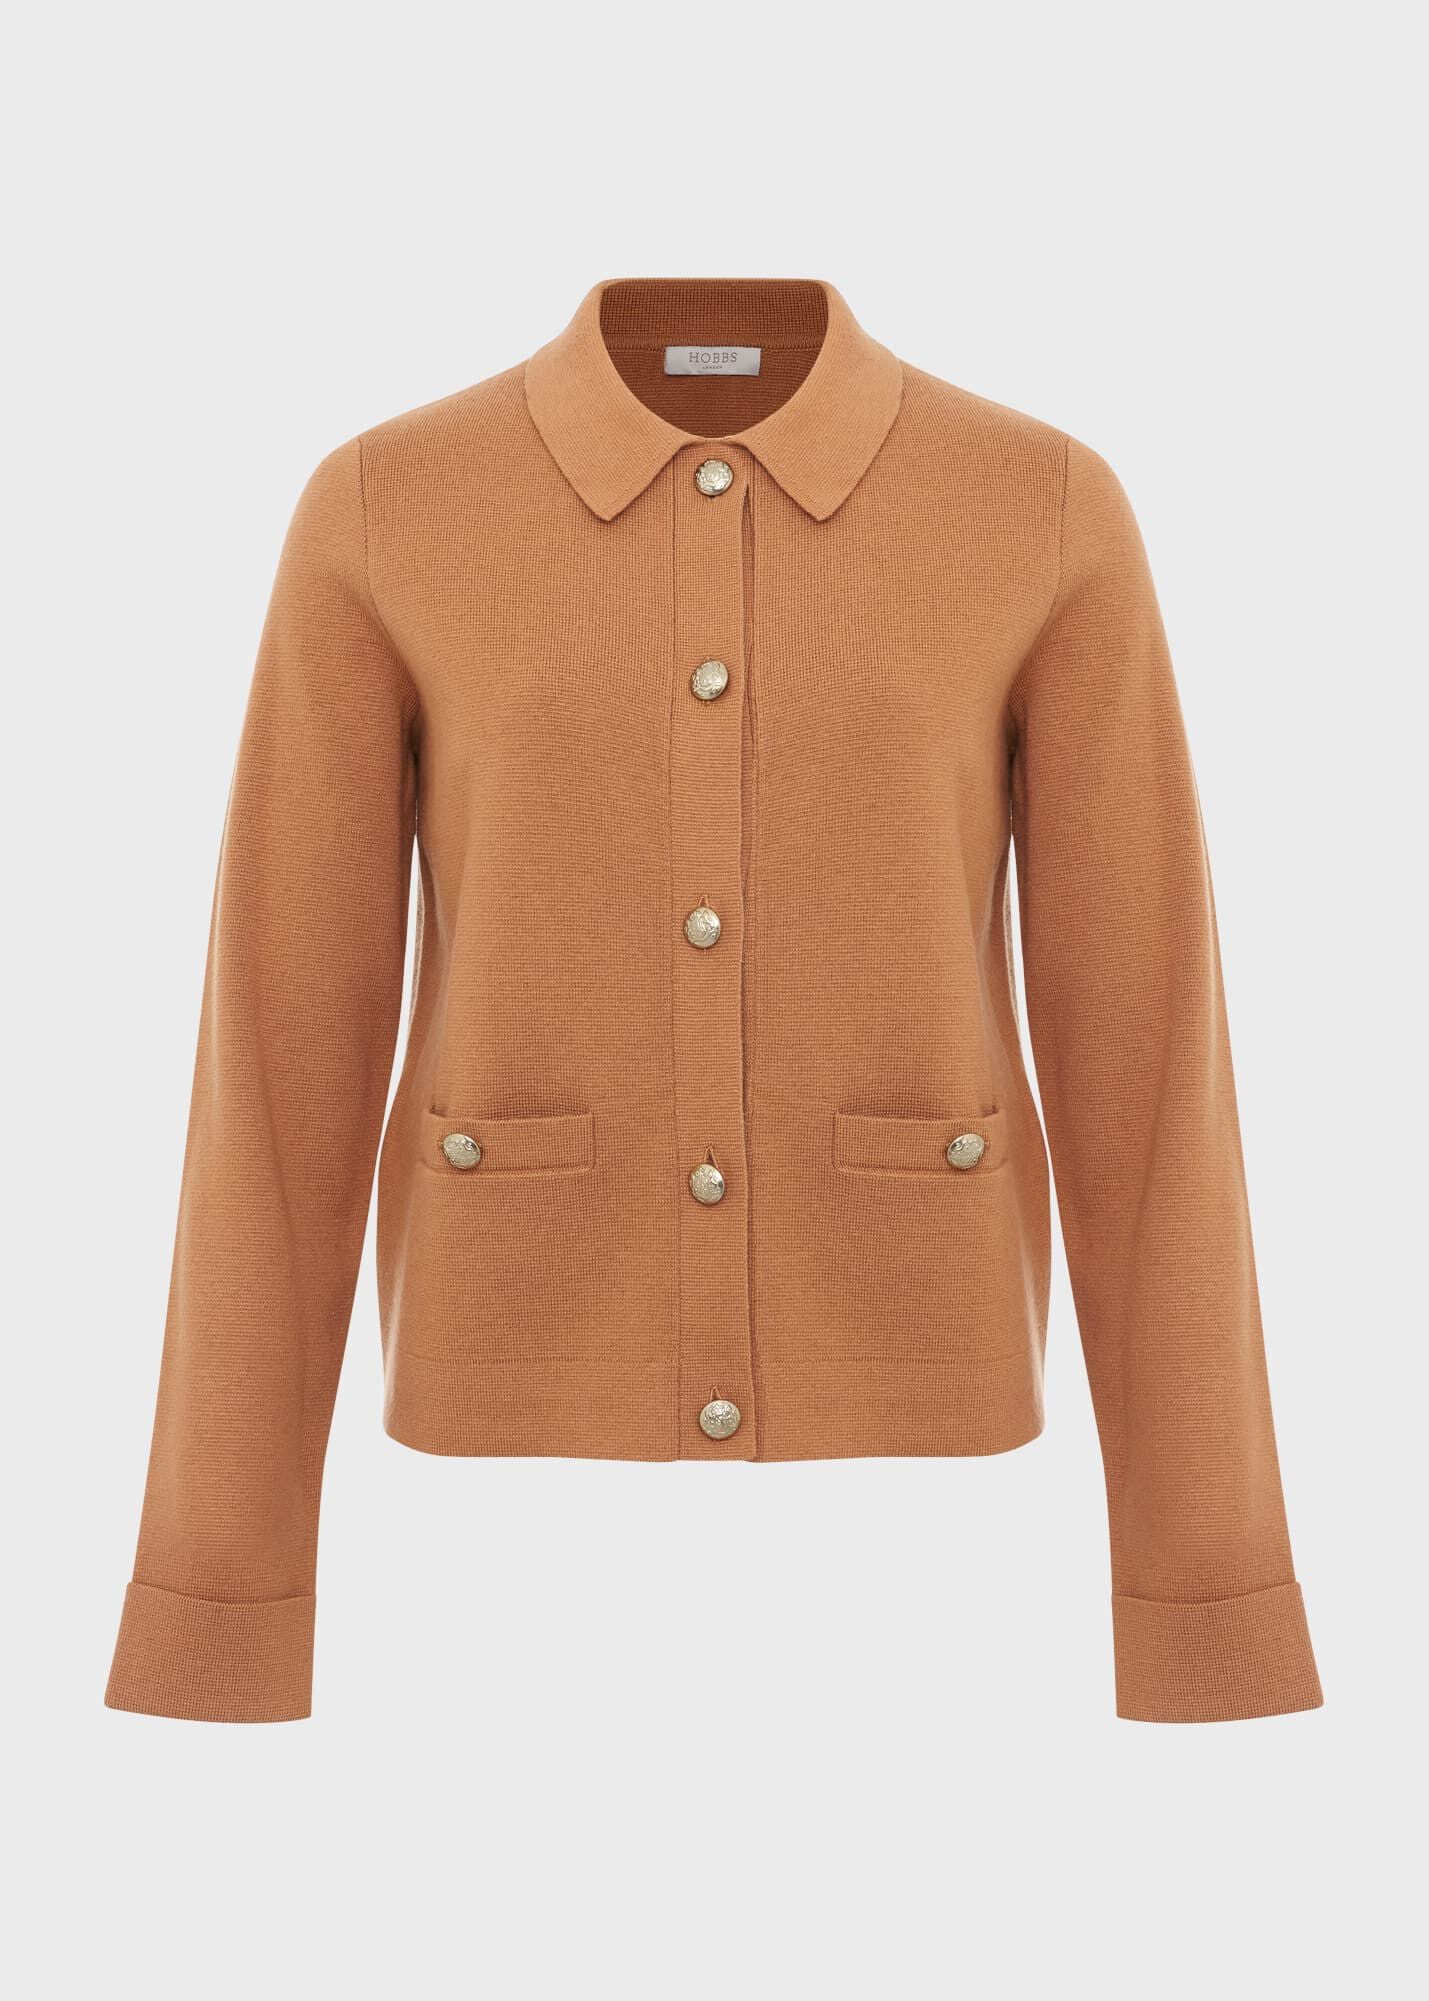 Mora Knitted Jacket 0124/9636/9083l00 Classic-Camel